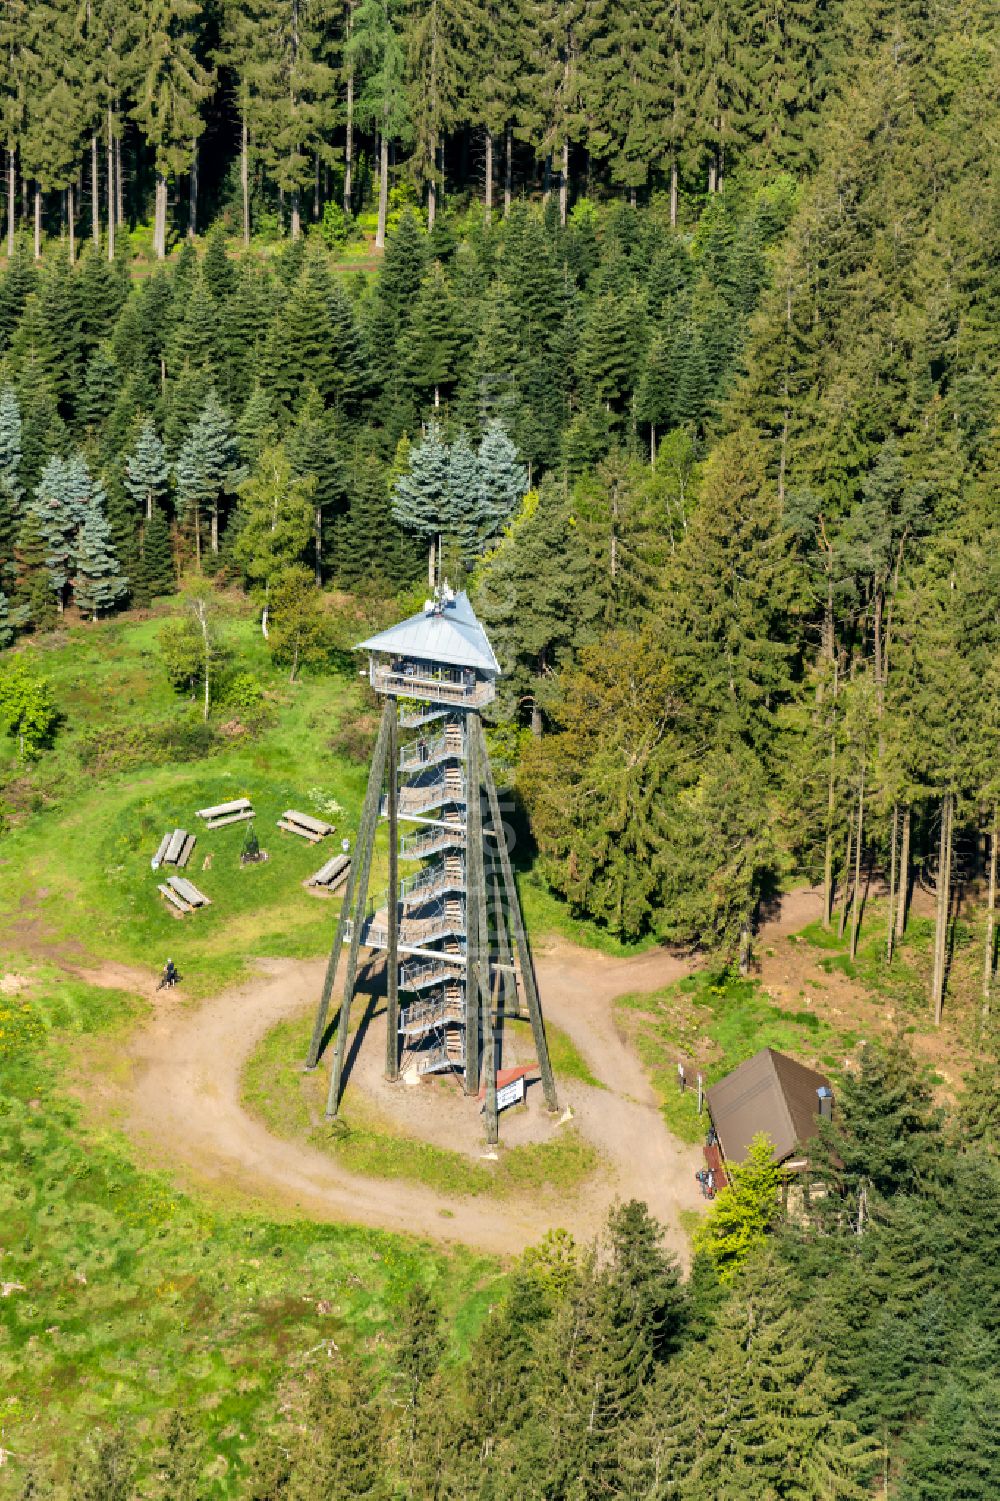 Freiamt from above - Structure of the observation tower Huenersedlturm in Freiamt in the state Baden-Wuerttemberg, Germany